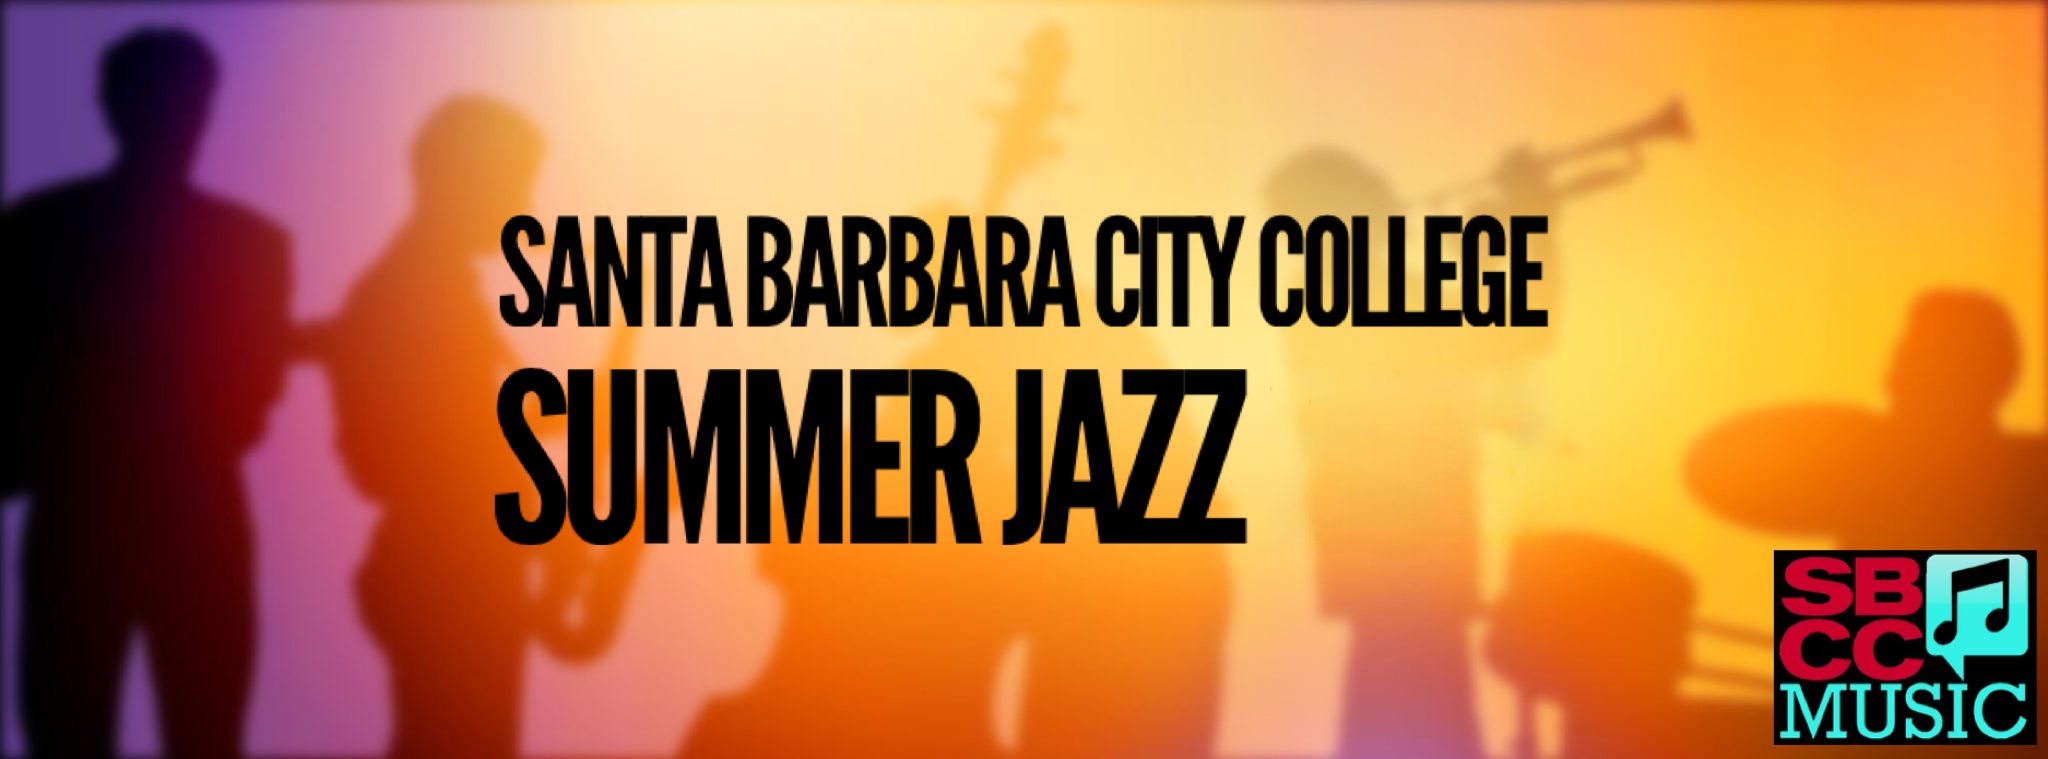 Colorful silhouettes of musicians in a jazz playing instruments, with the title "Santa Barbara City College Summer Jazz" overlaid.